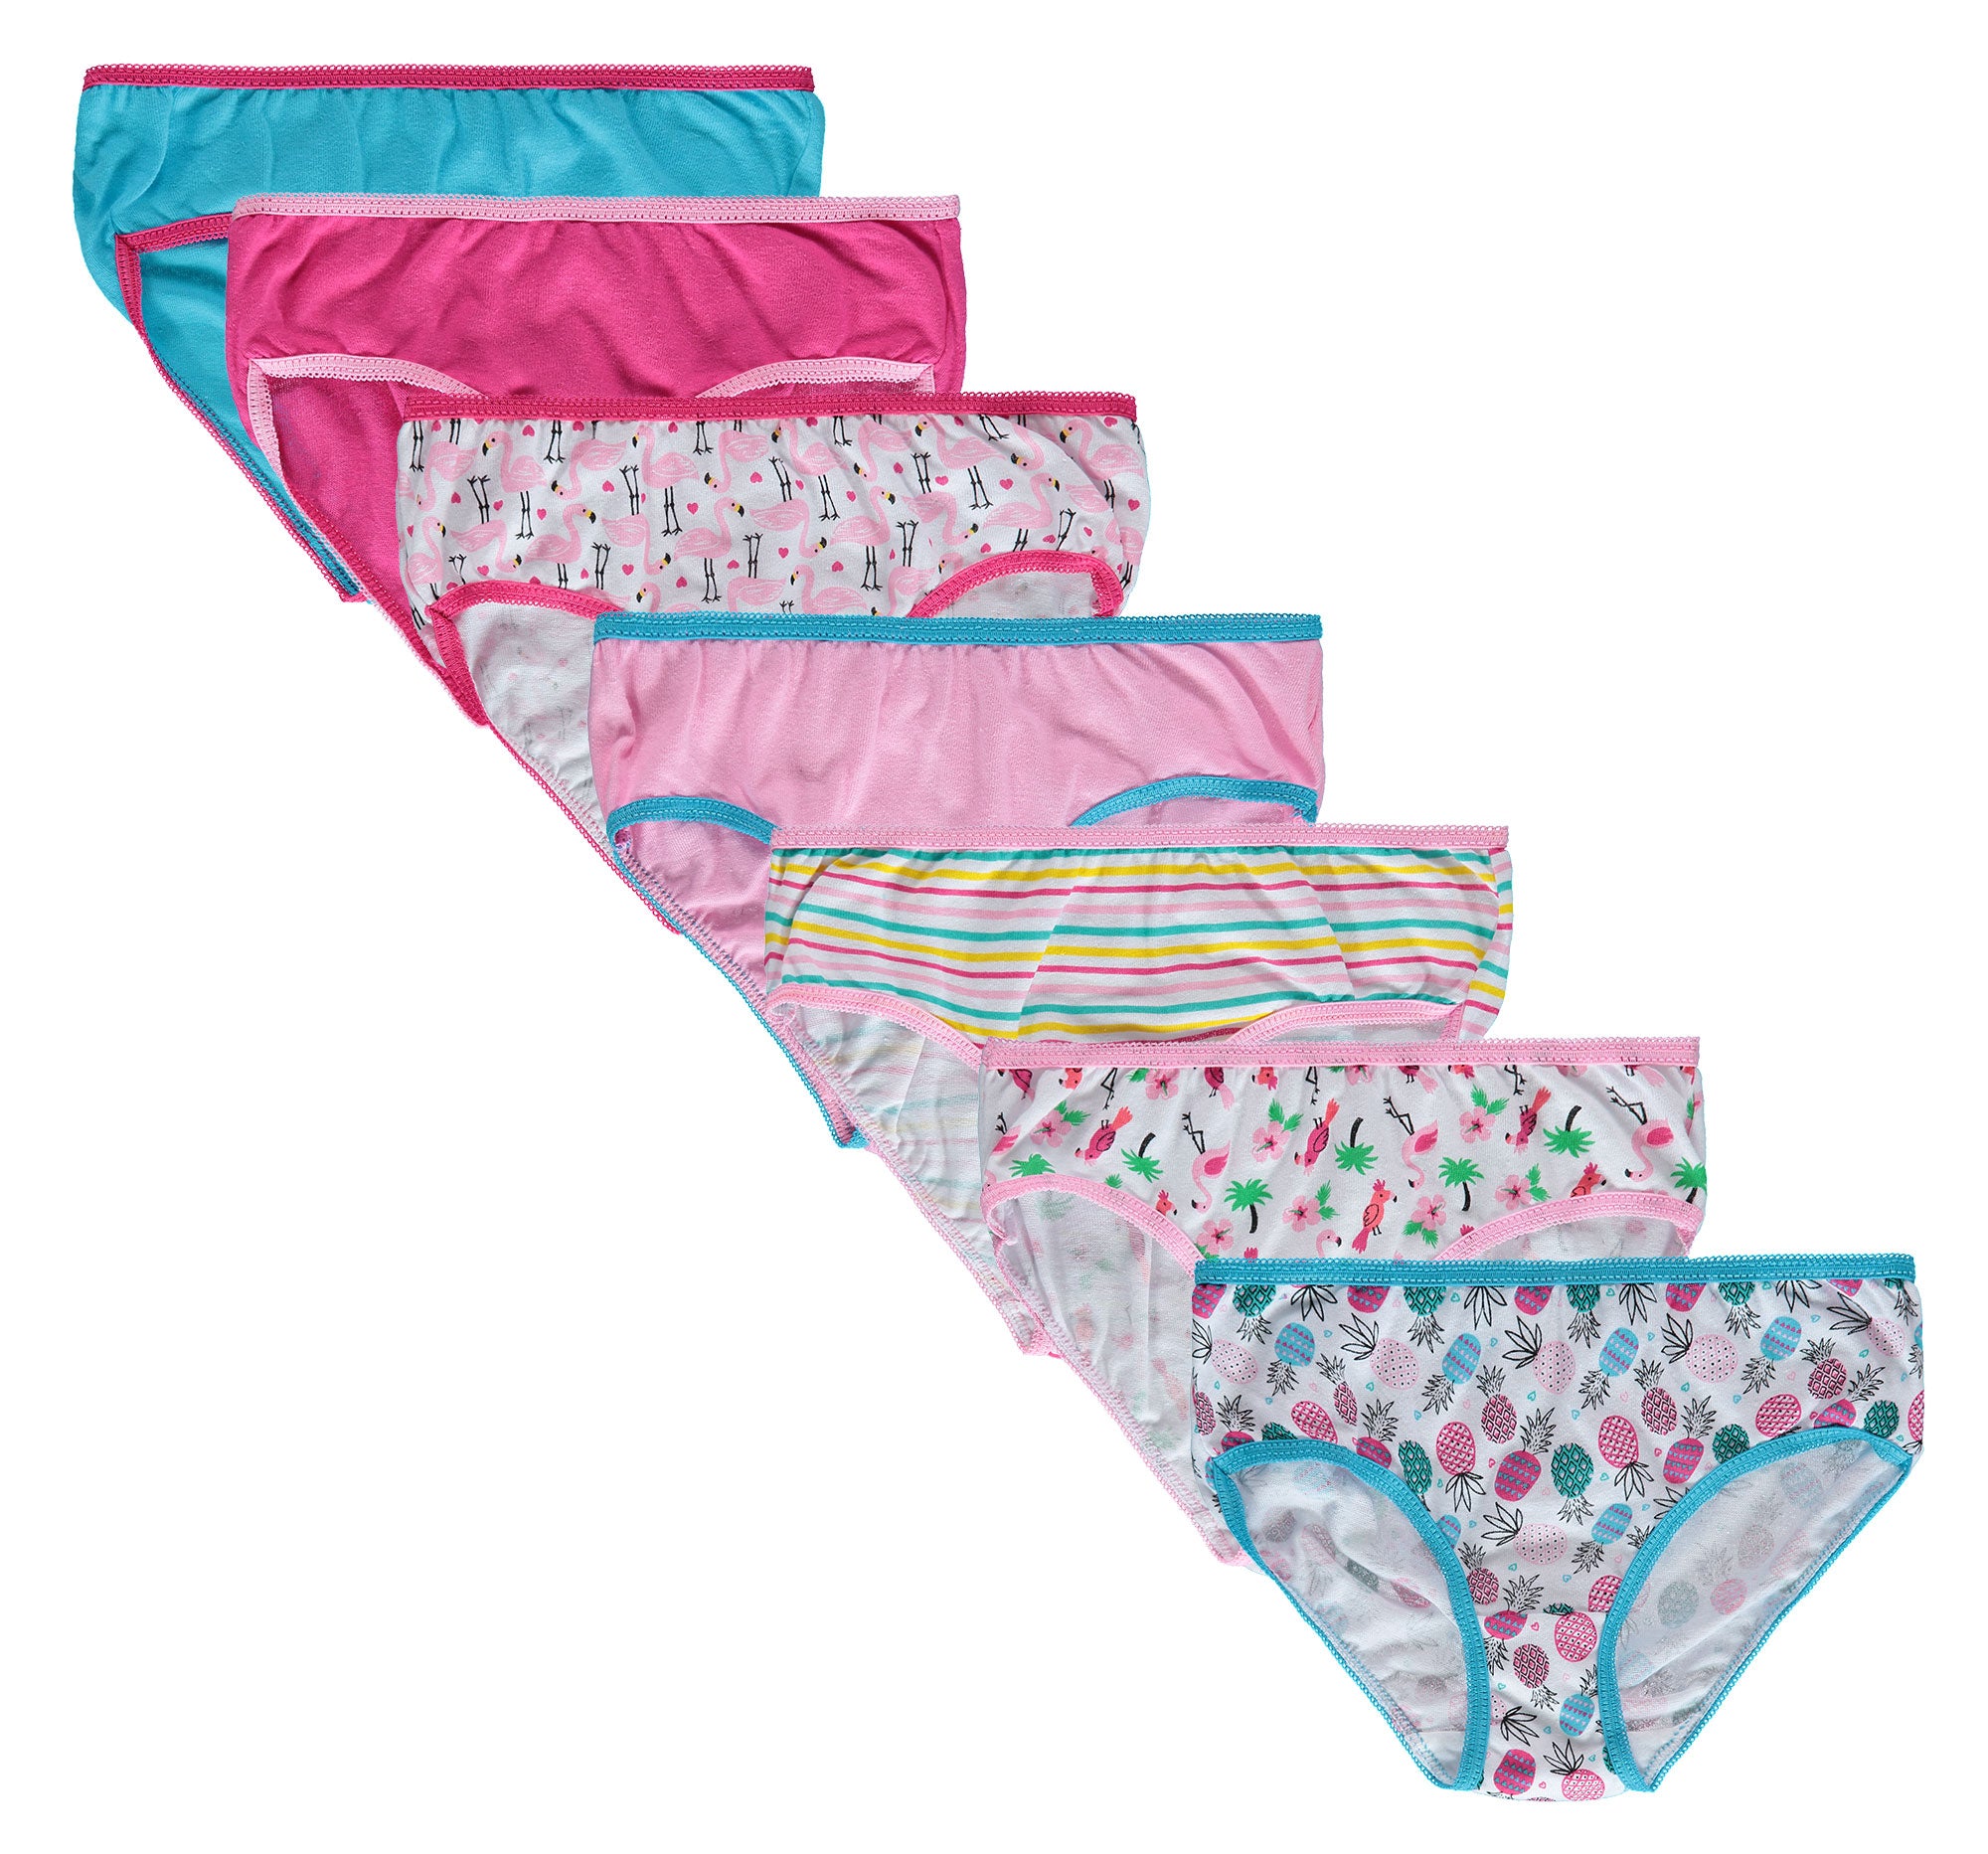 Buy Red Rose Girls Pack Of 3 Assorted Printed Bikini Briefs 12001 - Briefs  for Girls 8962885